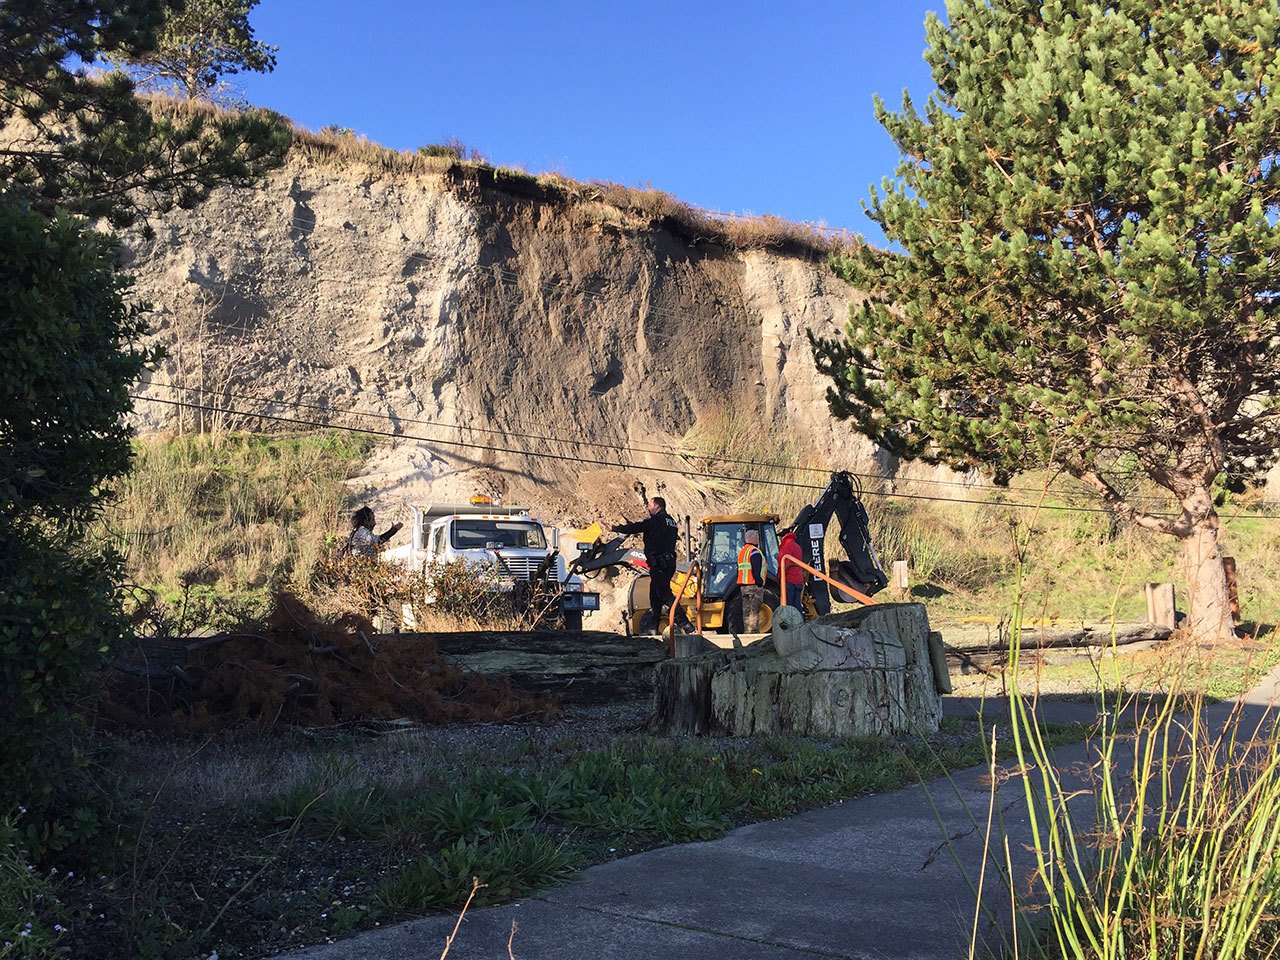 A portion of the bluff above Sims Way slid into the road in Port Townsend on Sunday. (Steve Mullensky/for Peninsula Daily News)